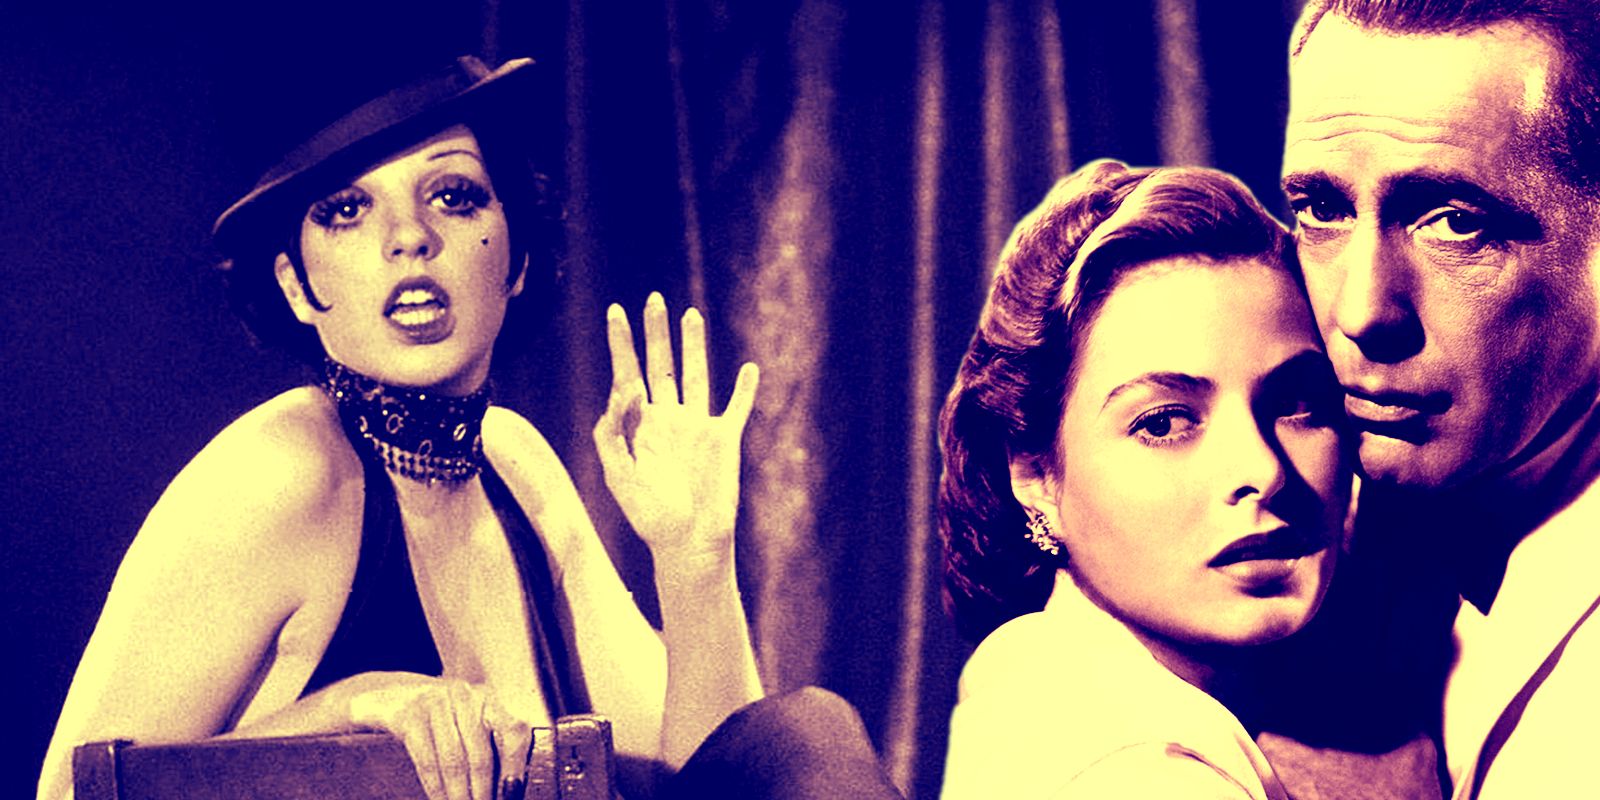 This image shows Casablanca's main couple next to Liza Minnelli in Cabaret.